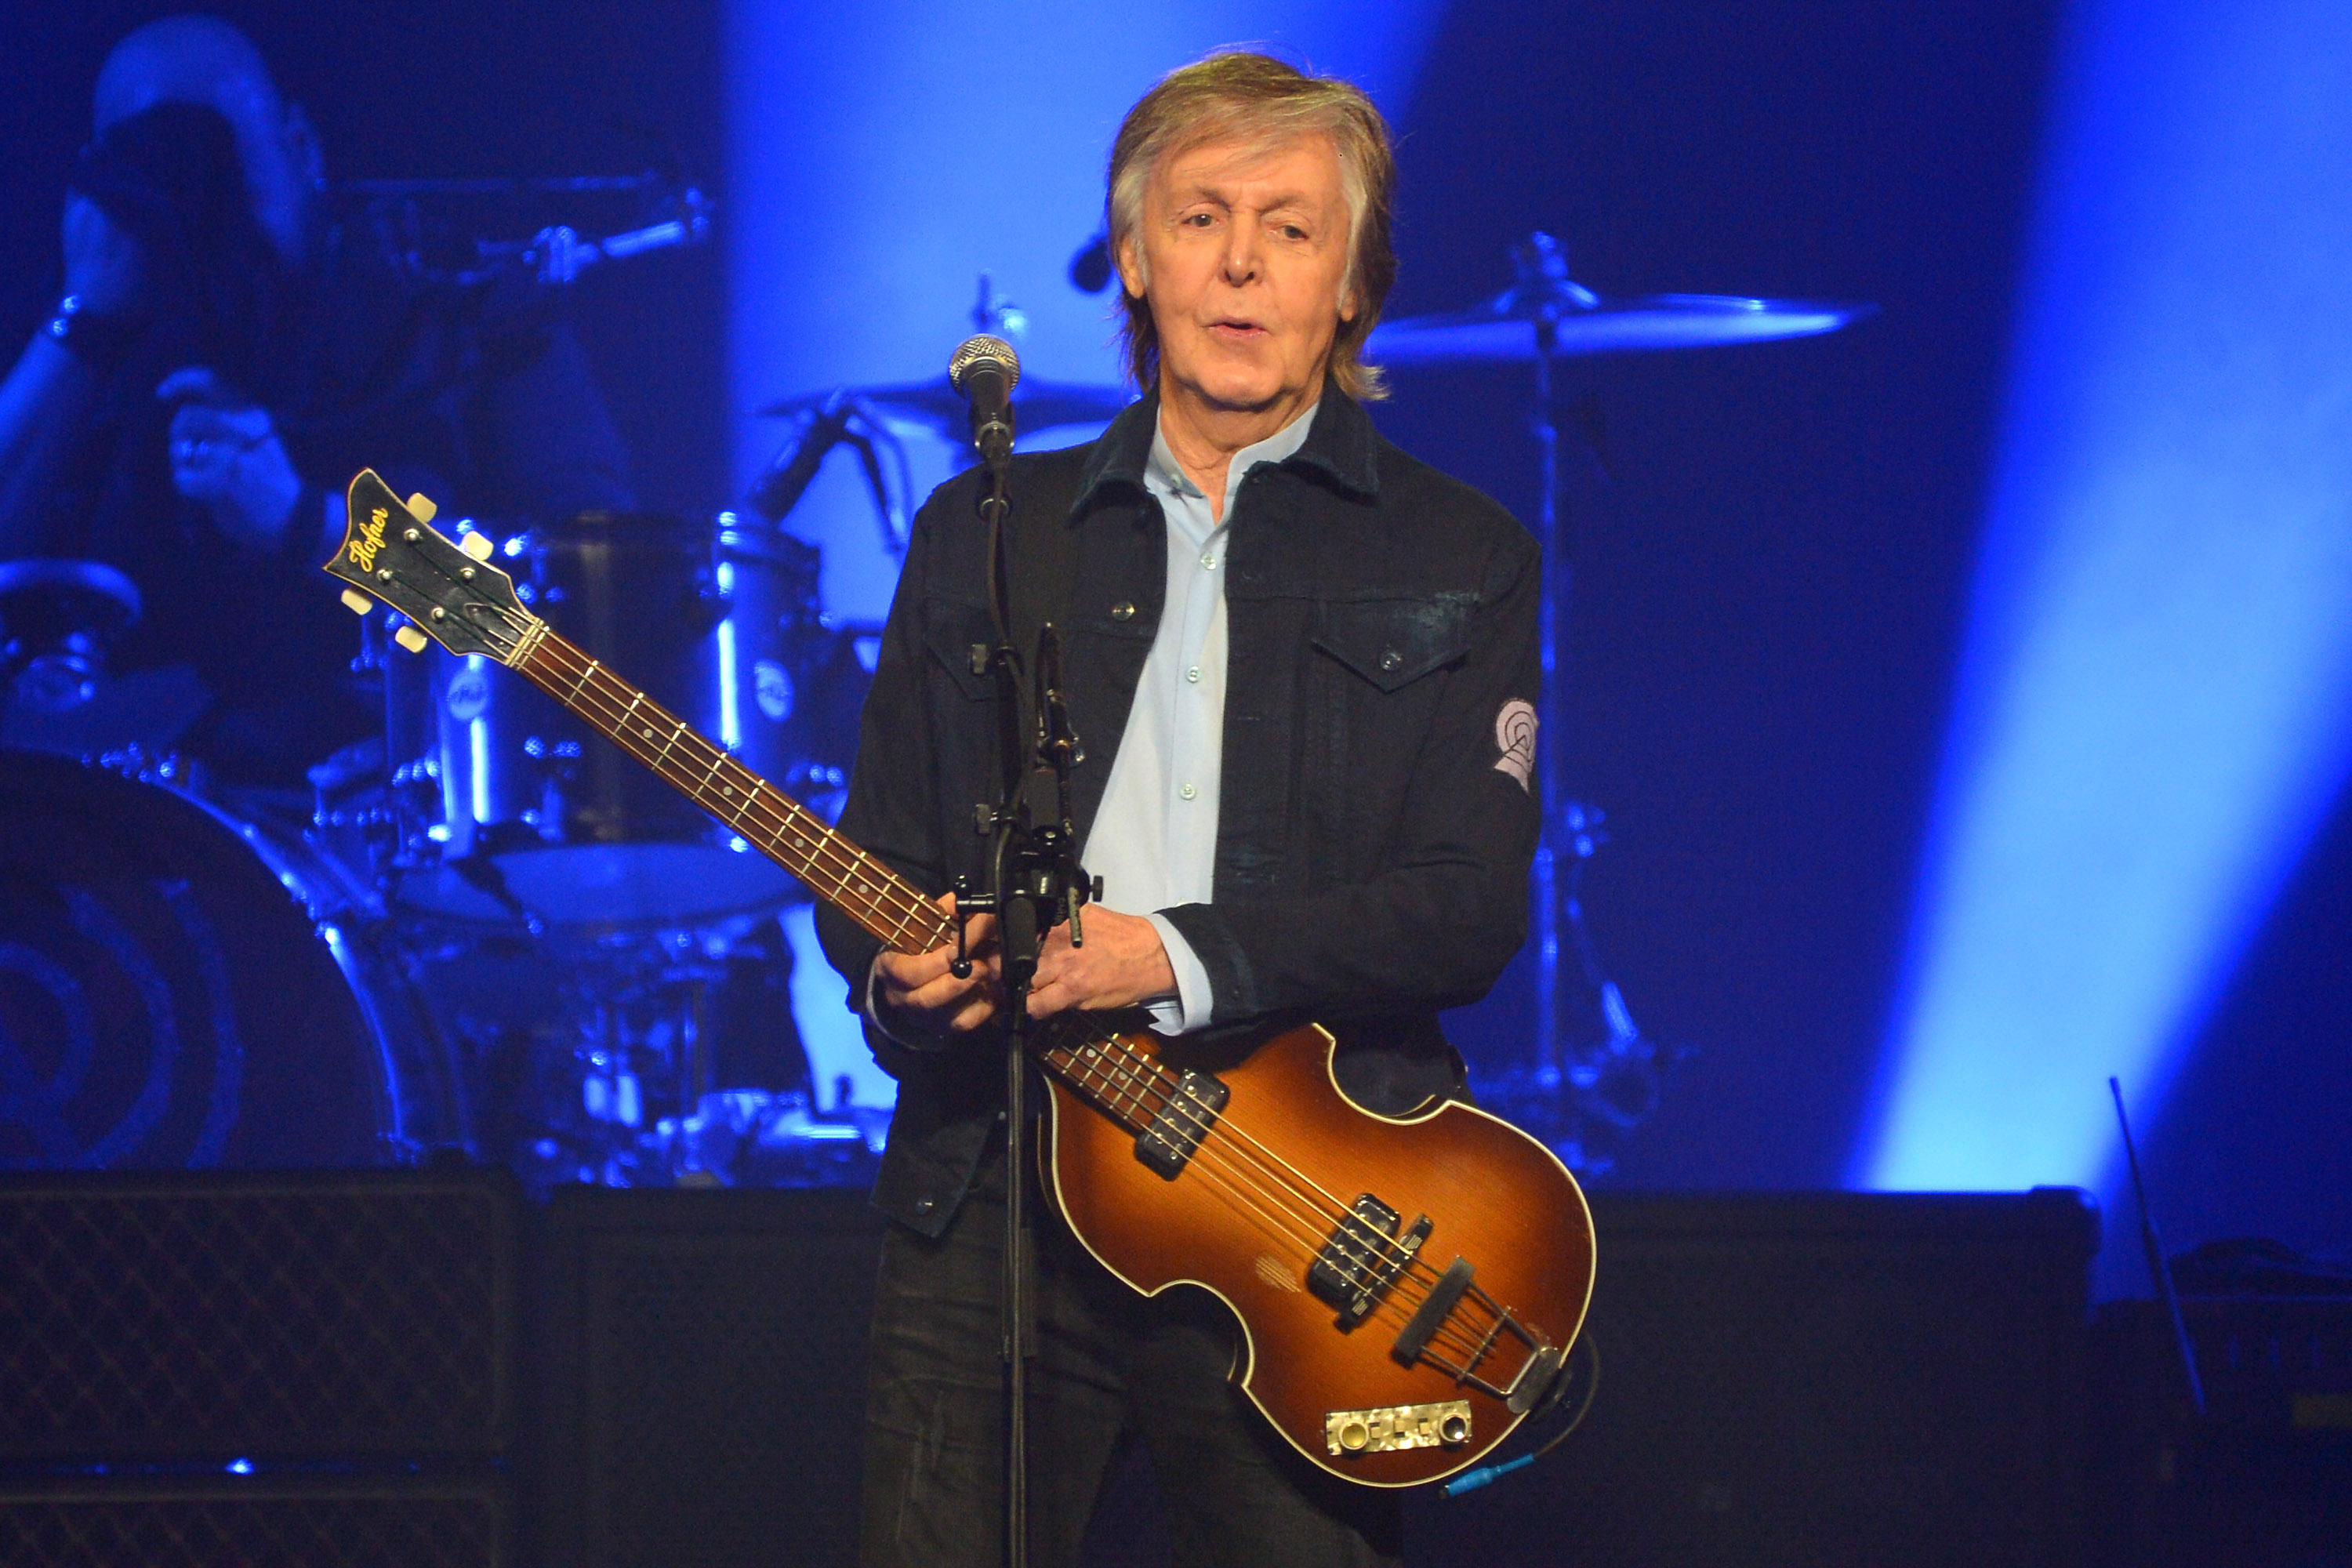 Sir Paul McCartney performs live on stage at the O2 Arena during his 'Freshen Up' tour, on December 16, 2018 in London, England. McCartney announced he will no longer sign autographs.